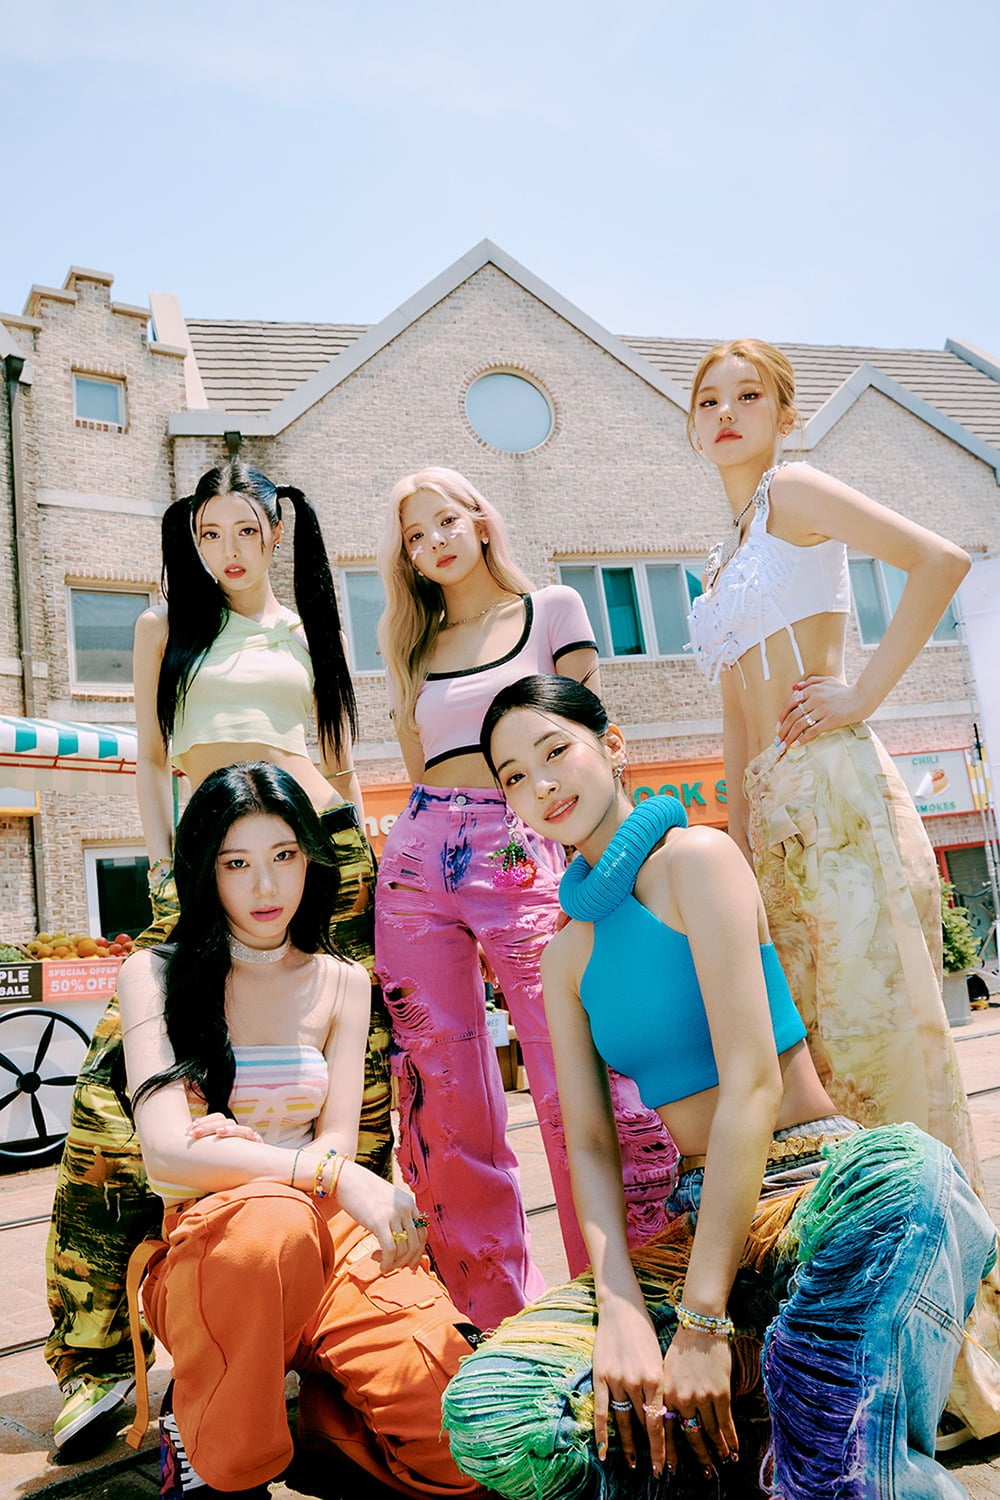 ITZY revealed their cool and hip charm in the music video behind the scenes